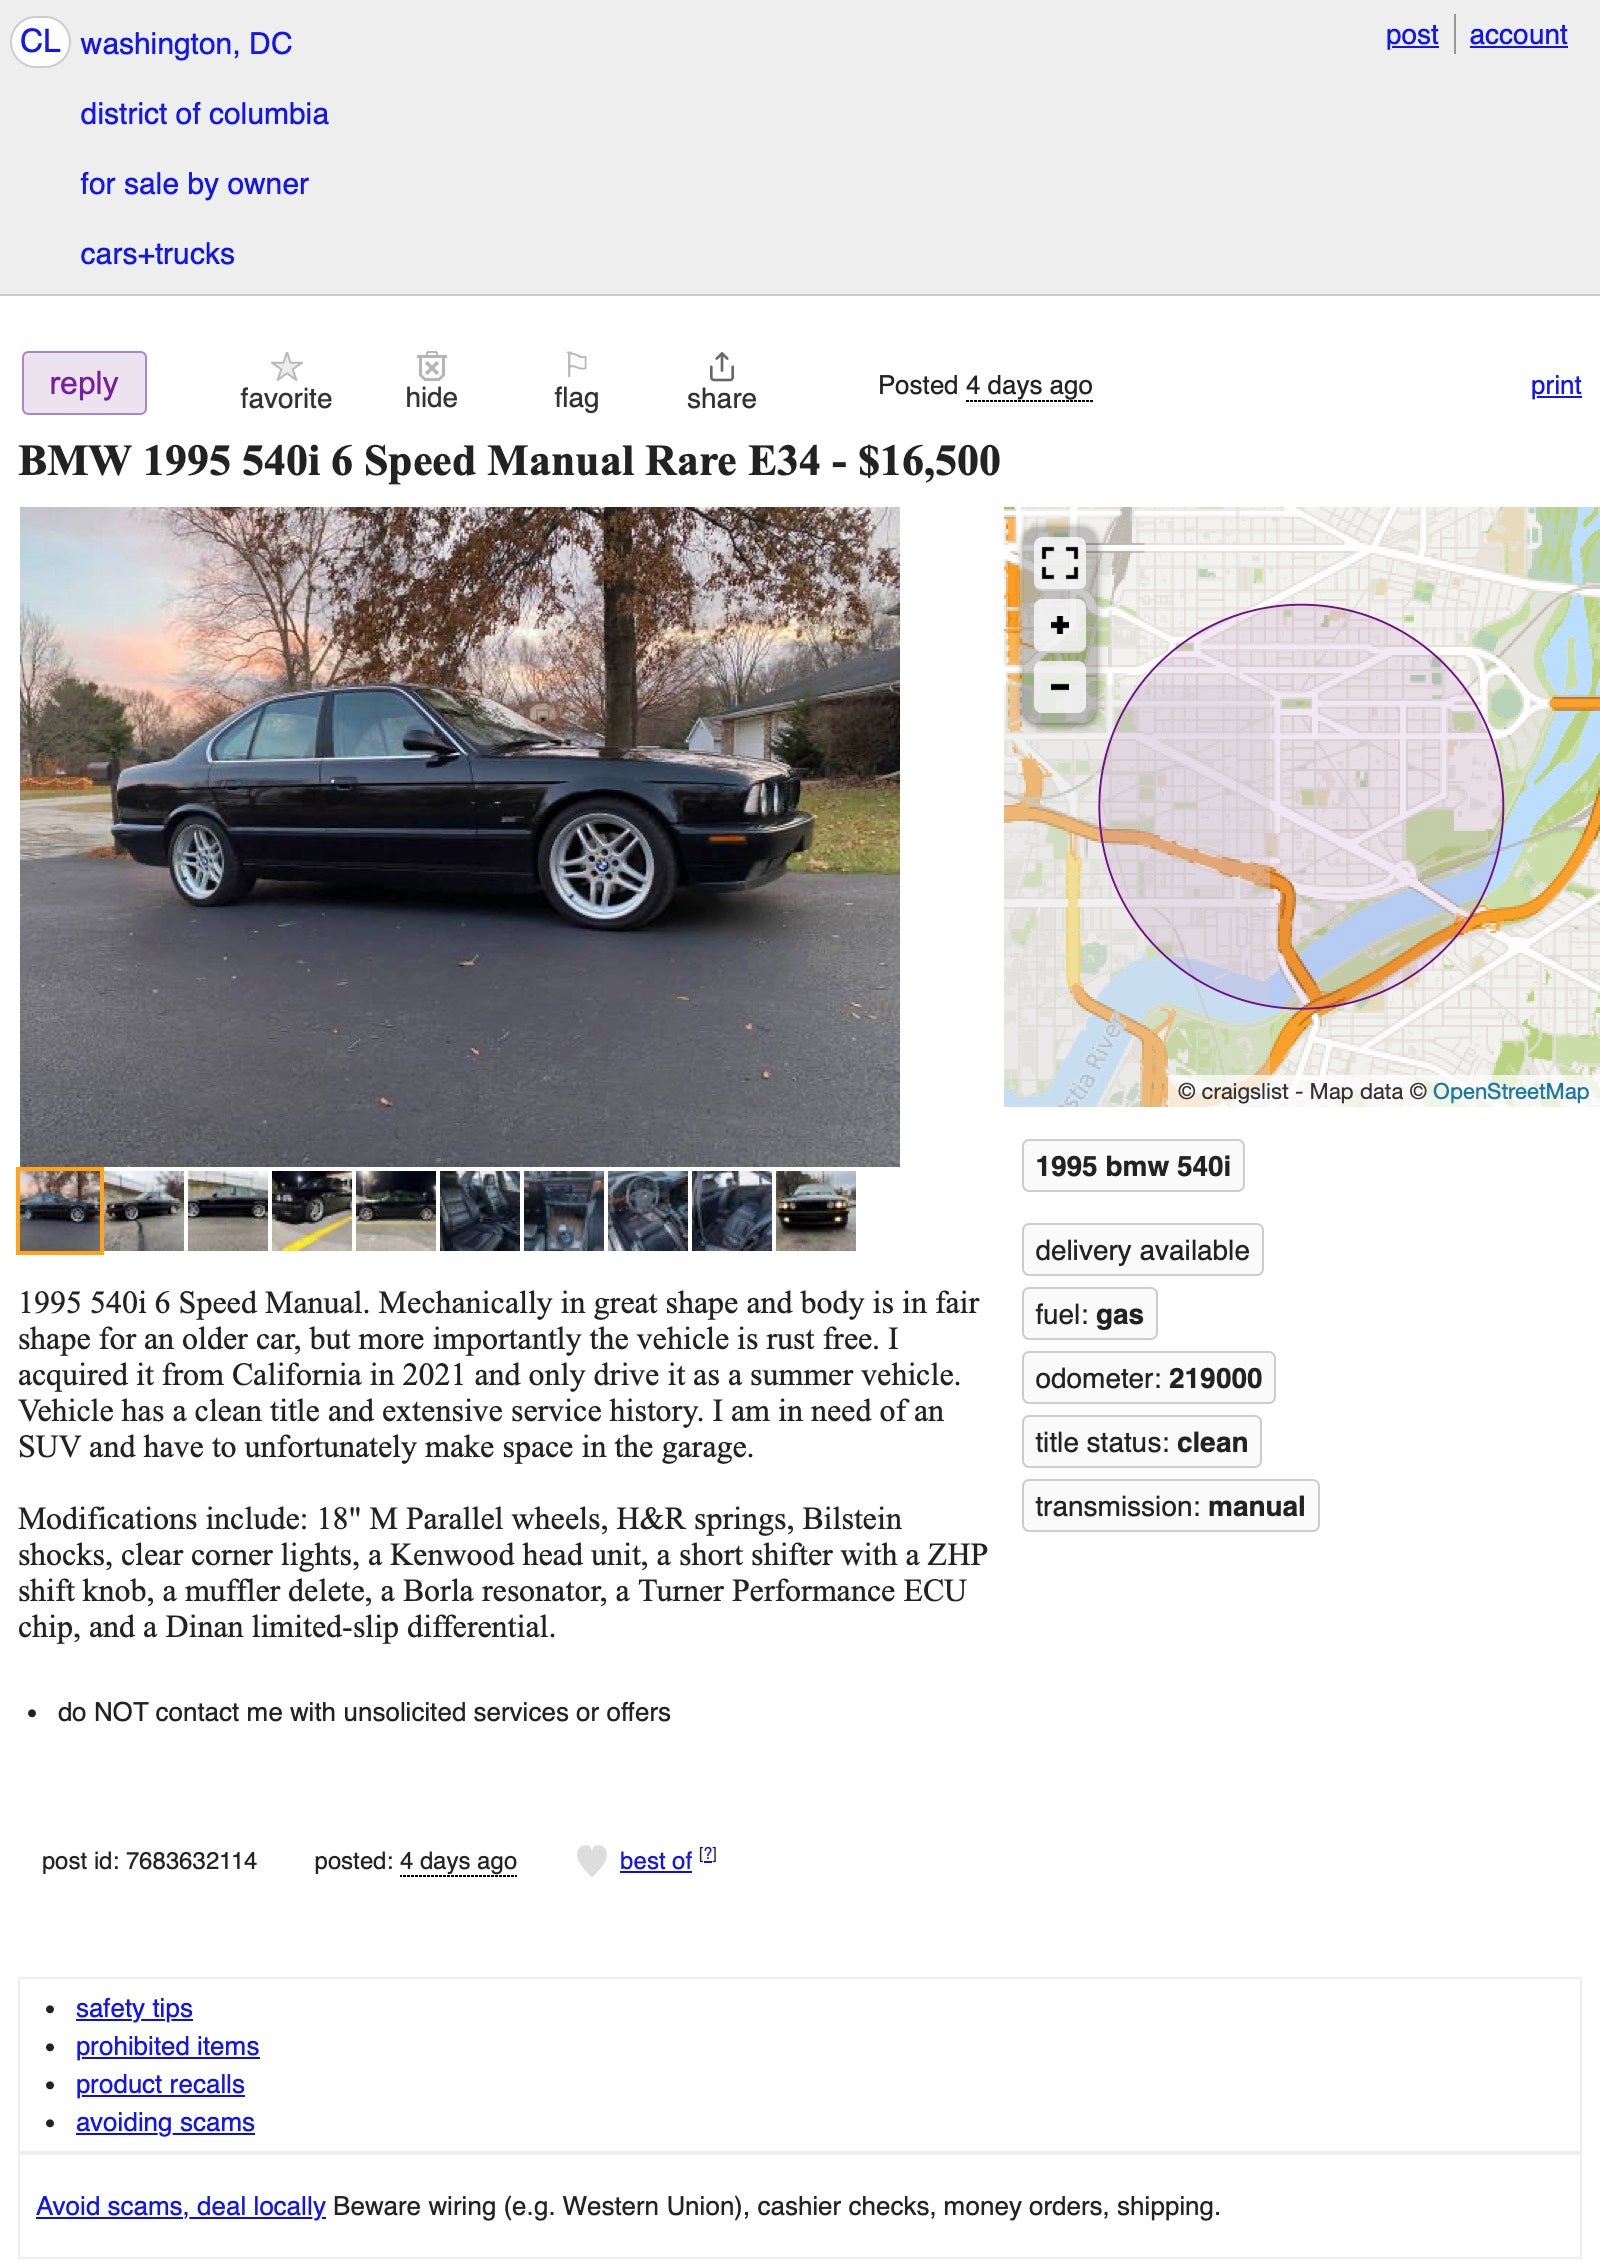 at $16,500, does this 1995 bmw 540i’s manual automatically make it a deal?